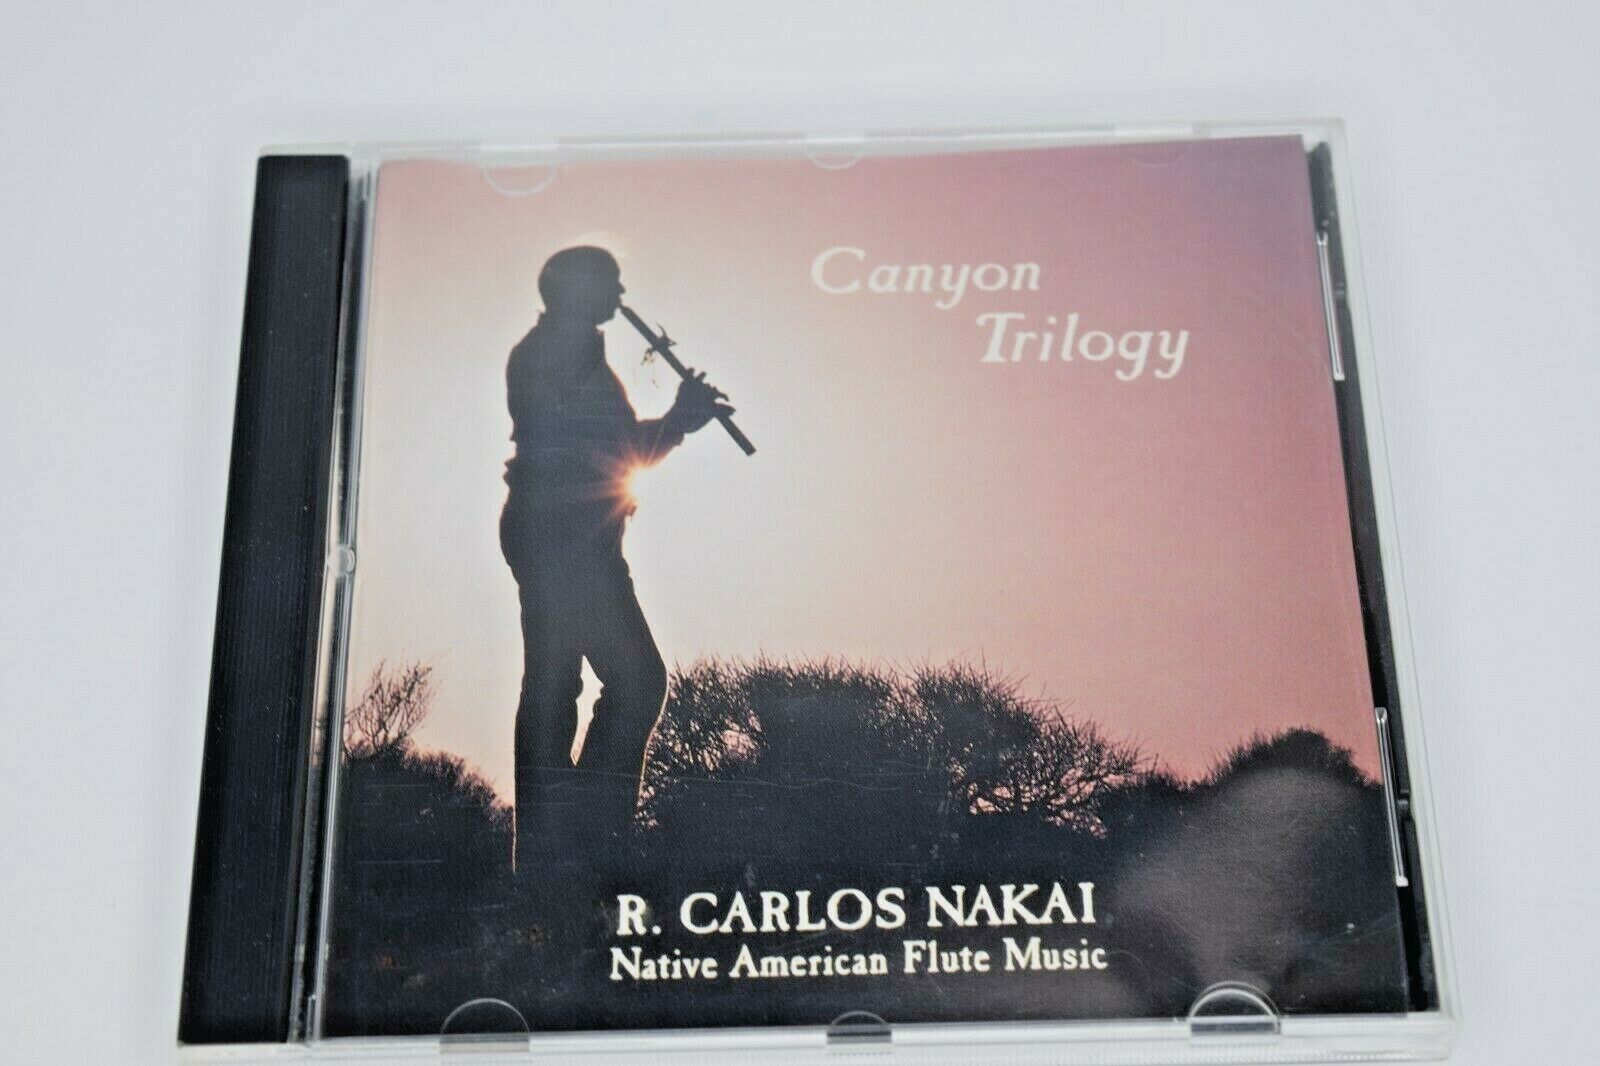 Canyon Trilogy by R. Carlos Nakai - Native American Flute Music (CD, 1989)